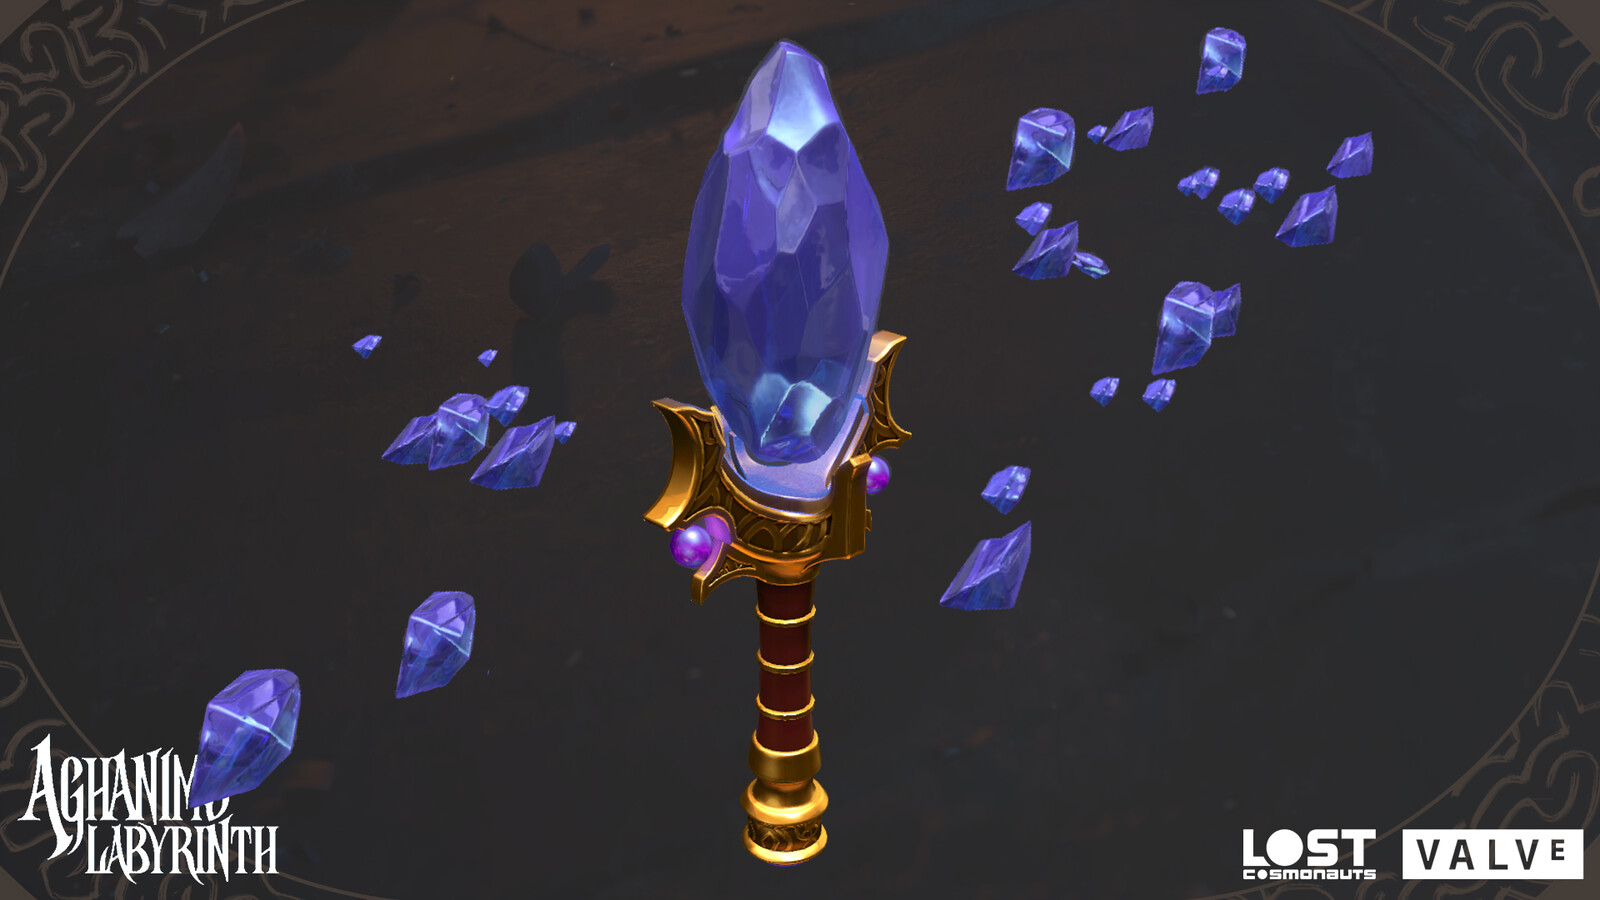 The Aghanim Scepter oooooo
(and various floating shards)
I remodeled the handle from an existing asset, touched up the texture, and made a new gem from scratch.